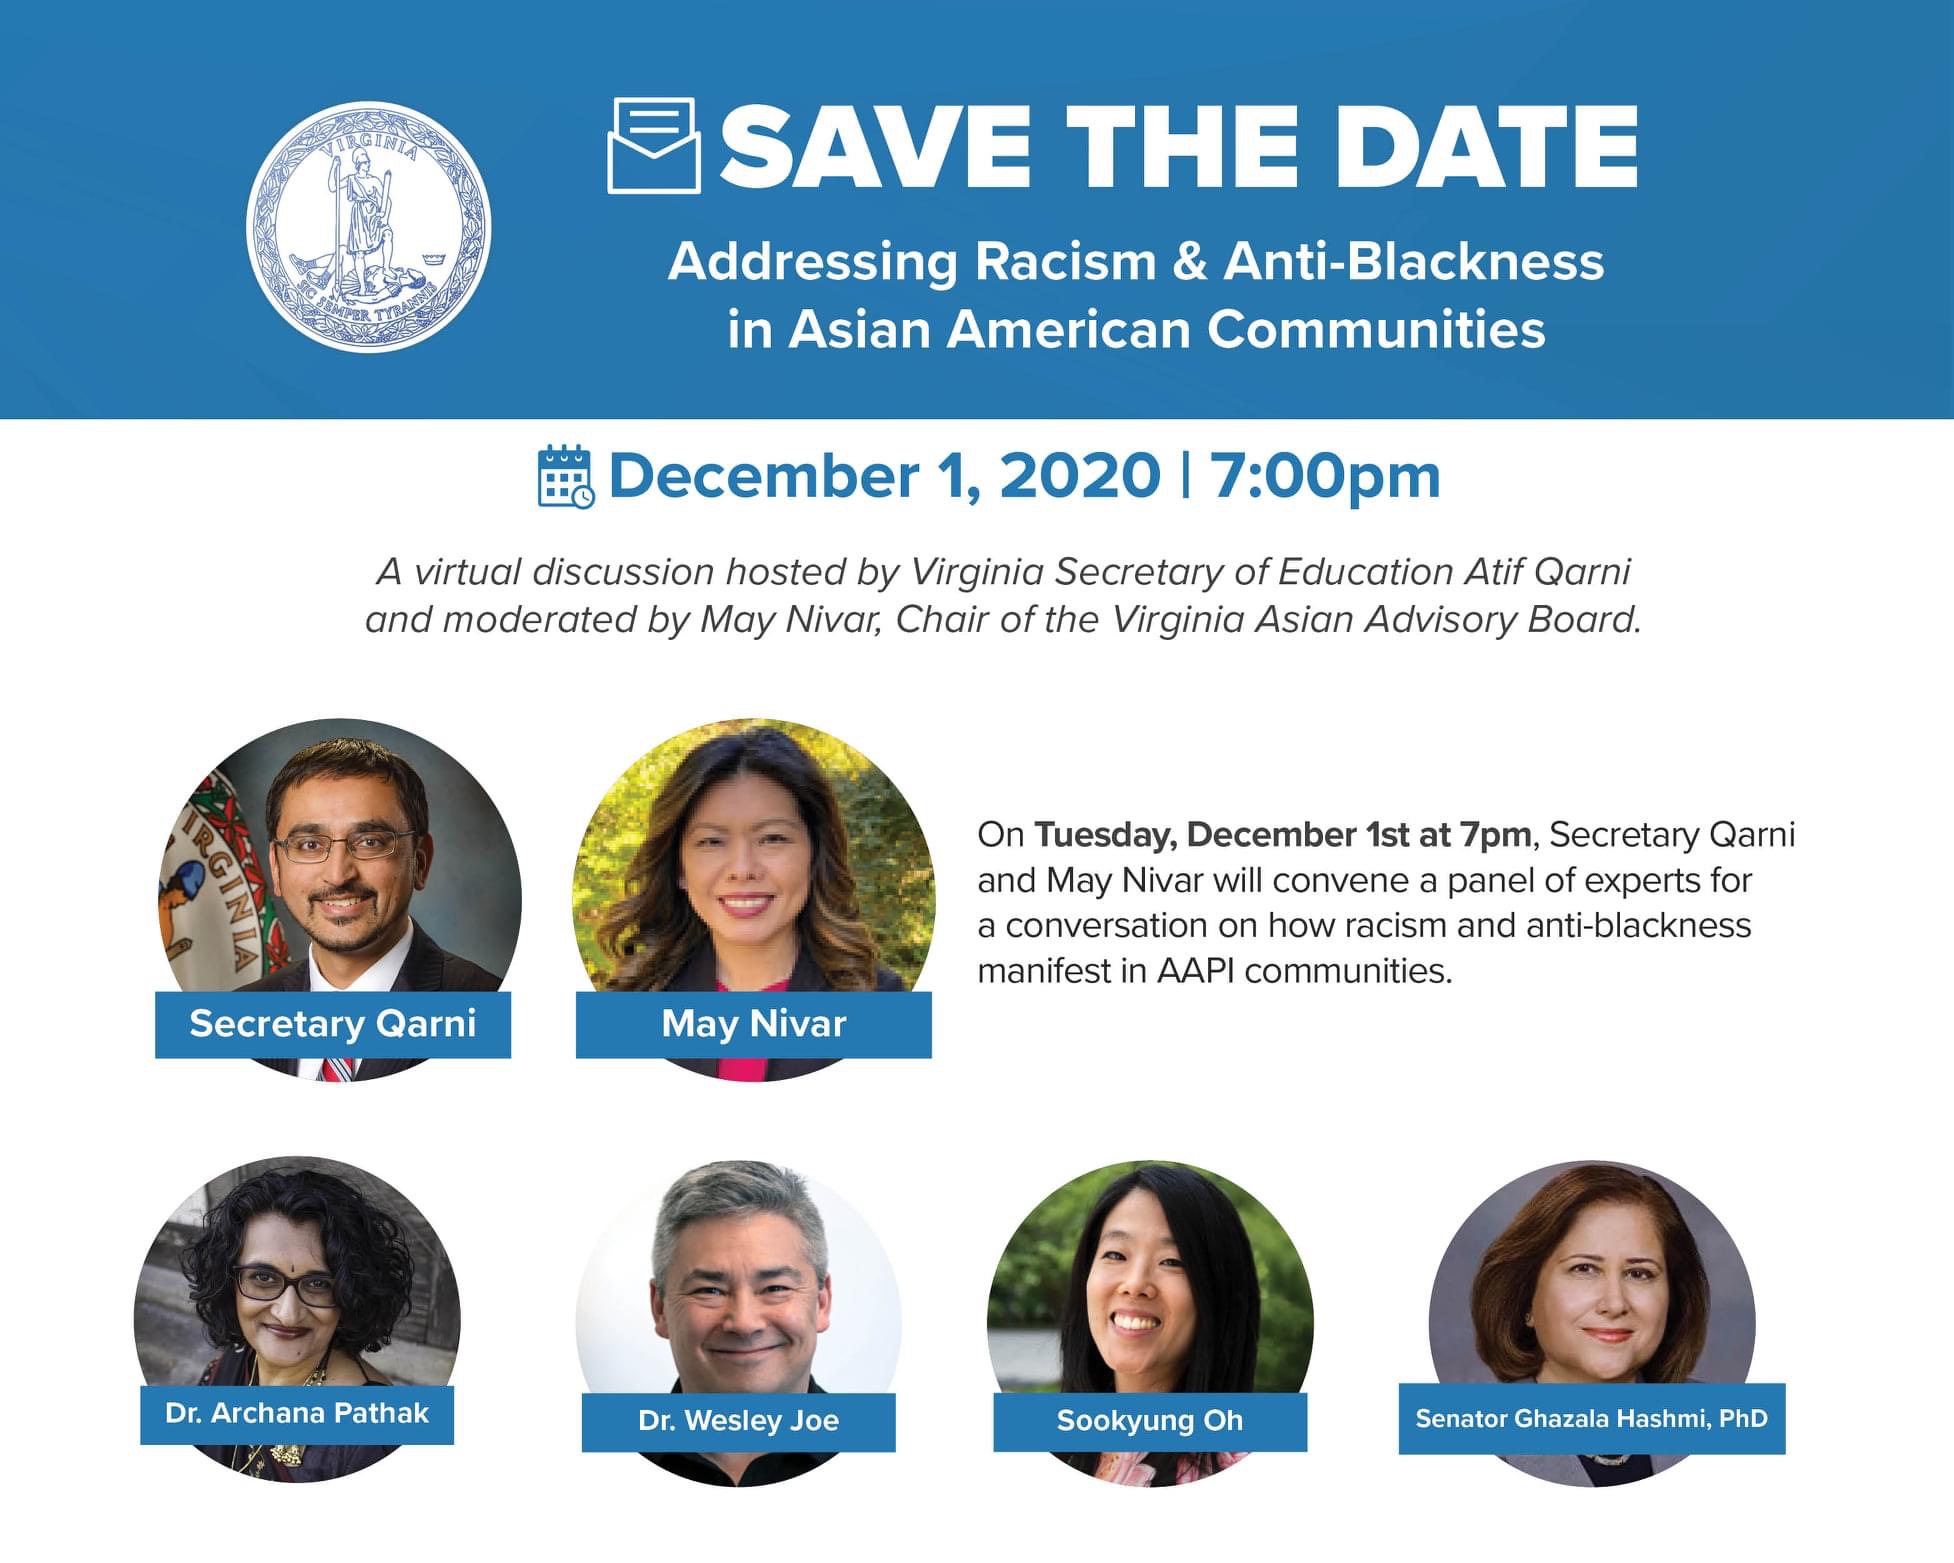 Addressing Racism and Anti-Blackness in Asian-American Communities: A Dialogue